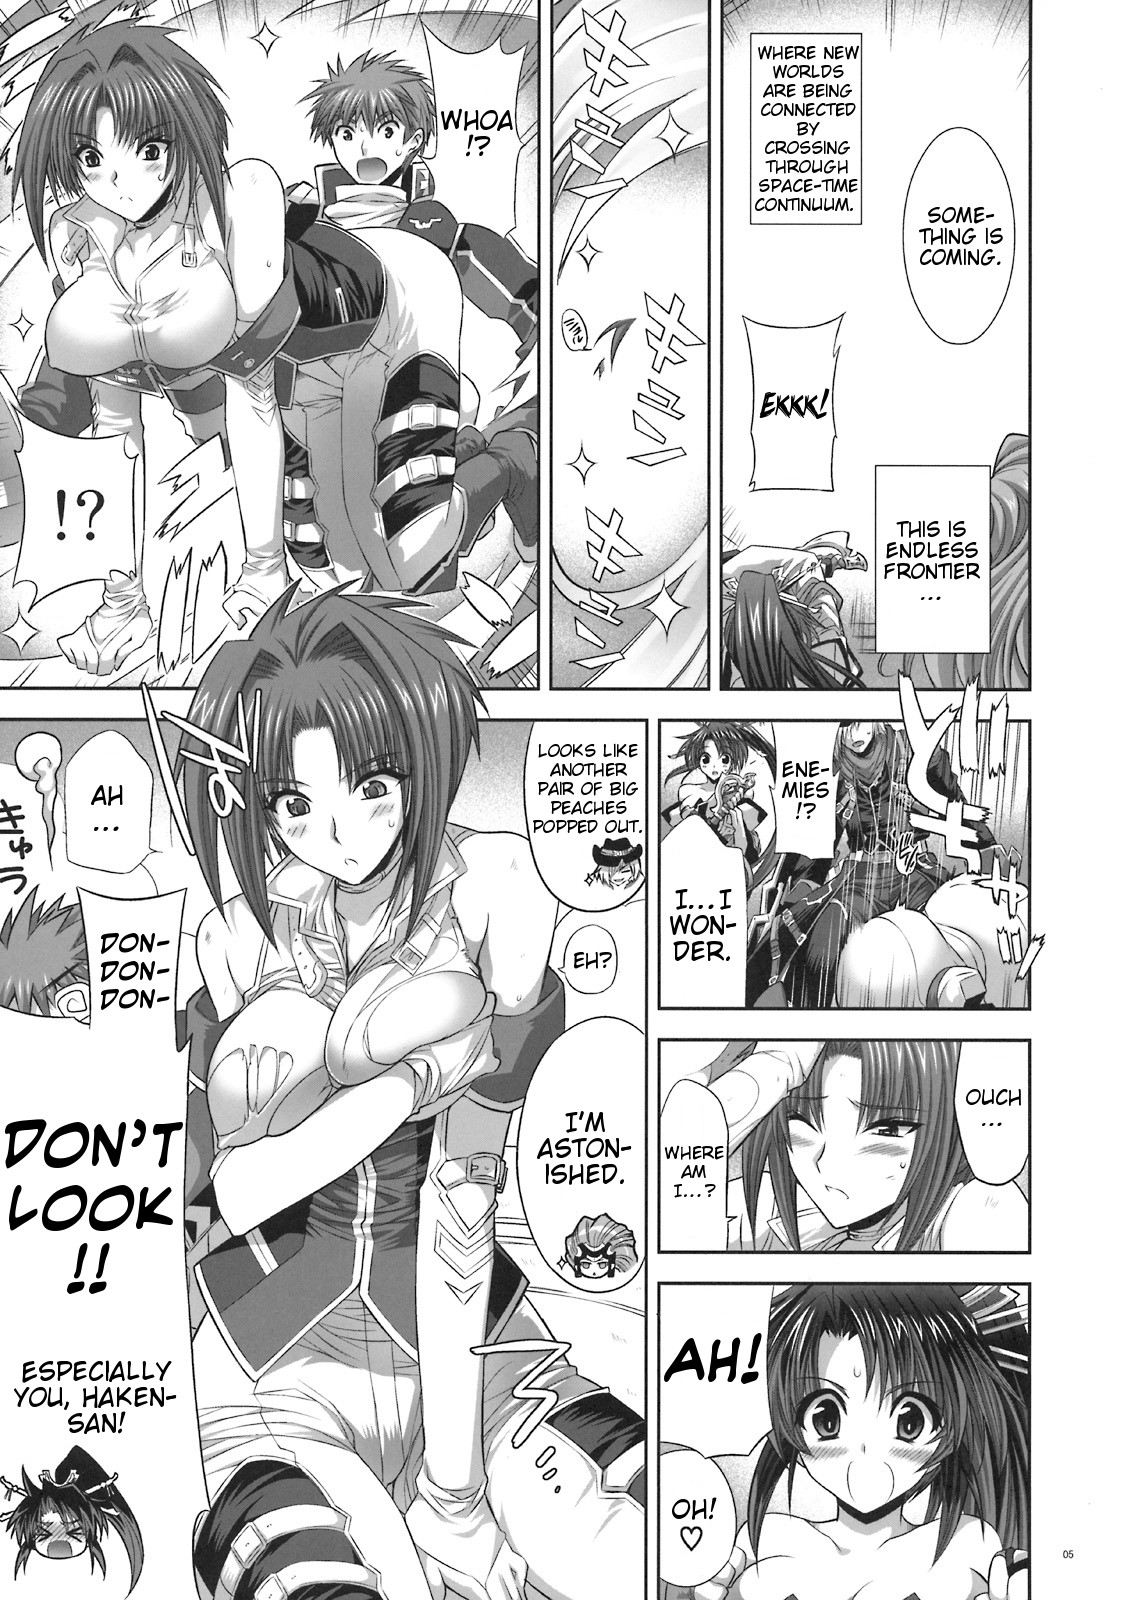 [FANTASY WIND] SUPExFRO (SRW & Endless Frontier)[Eng] page 5 full